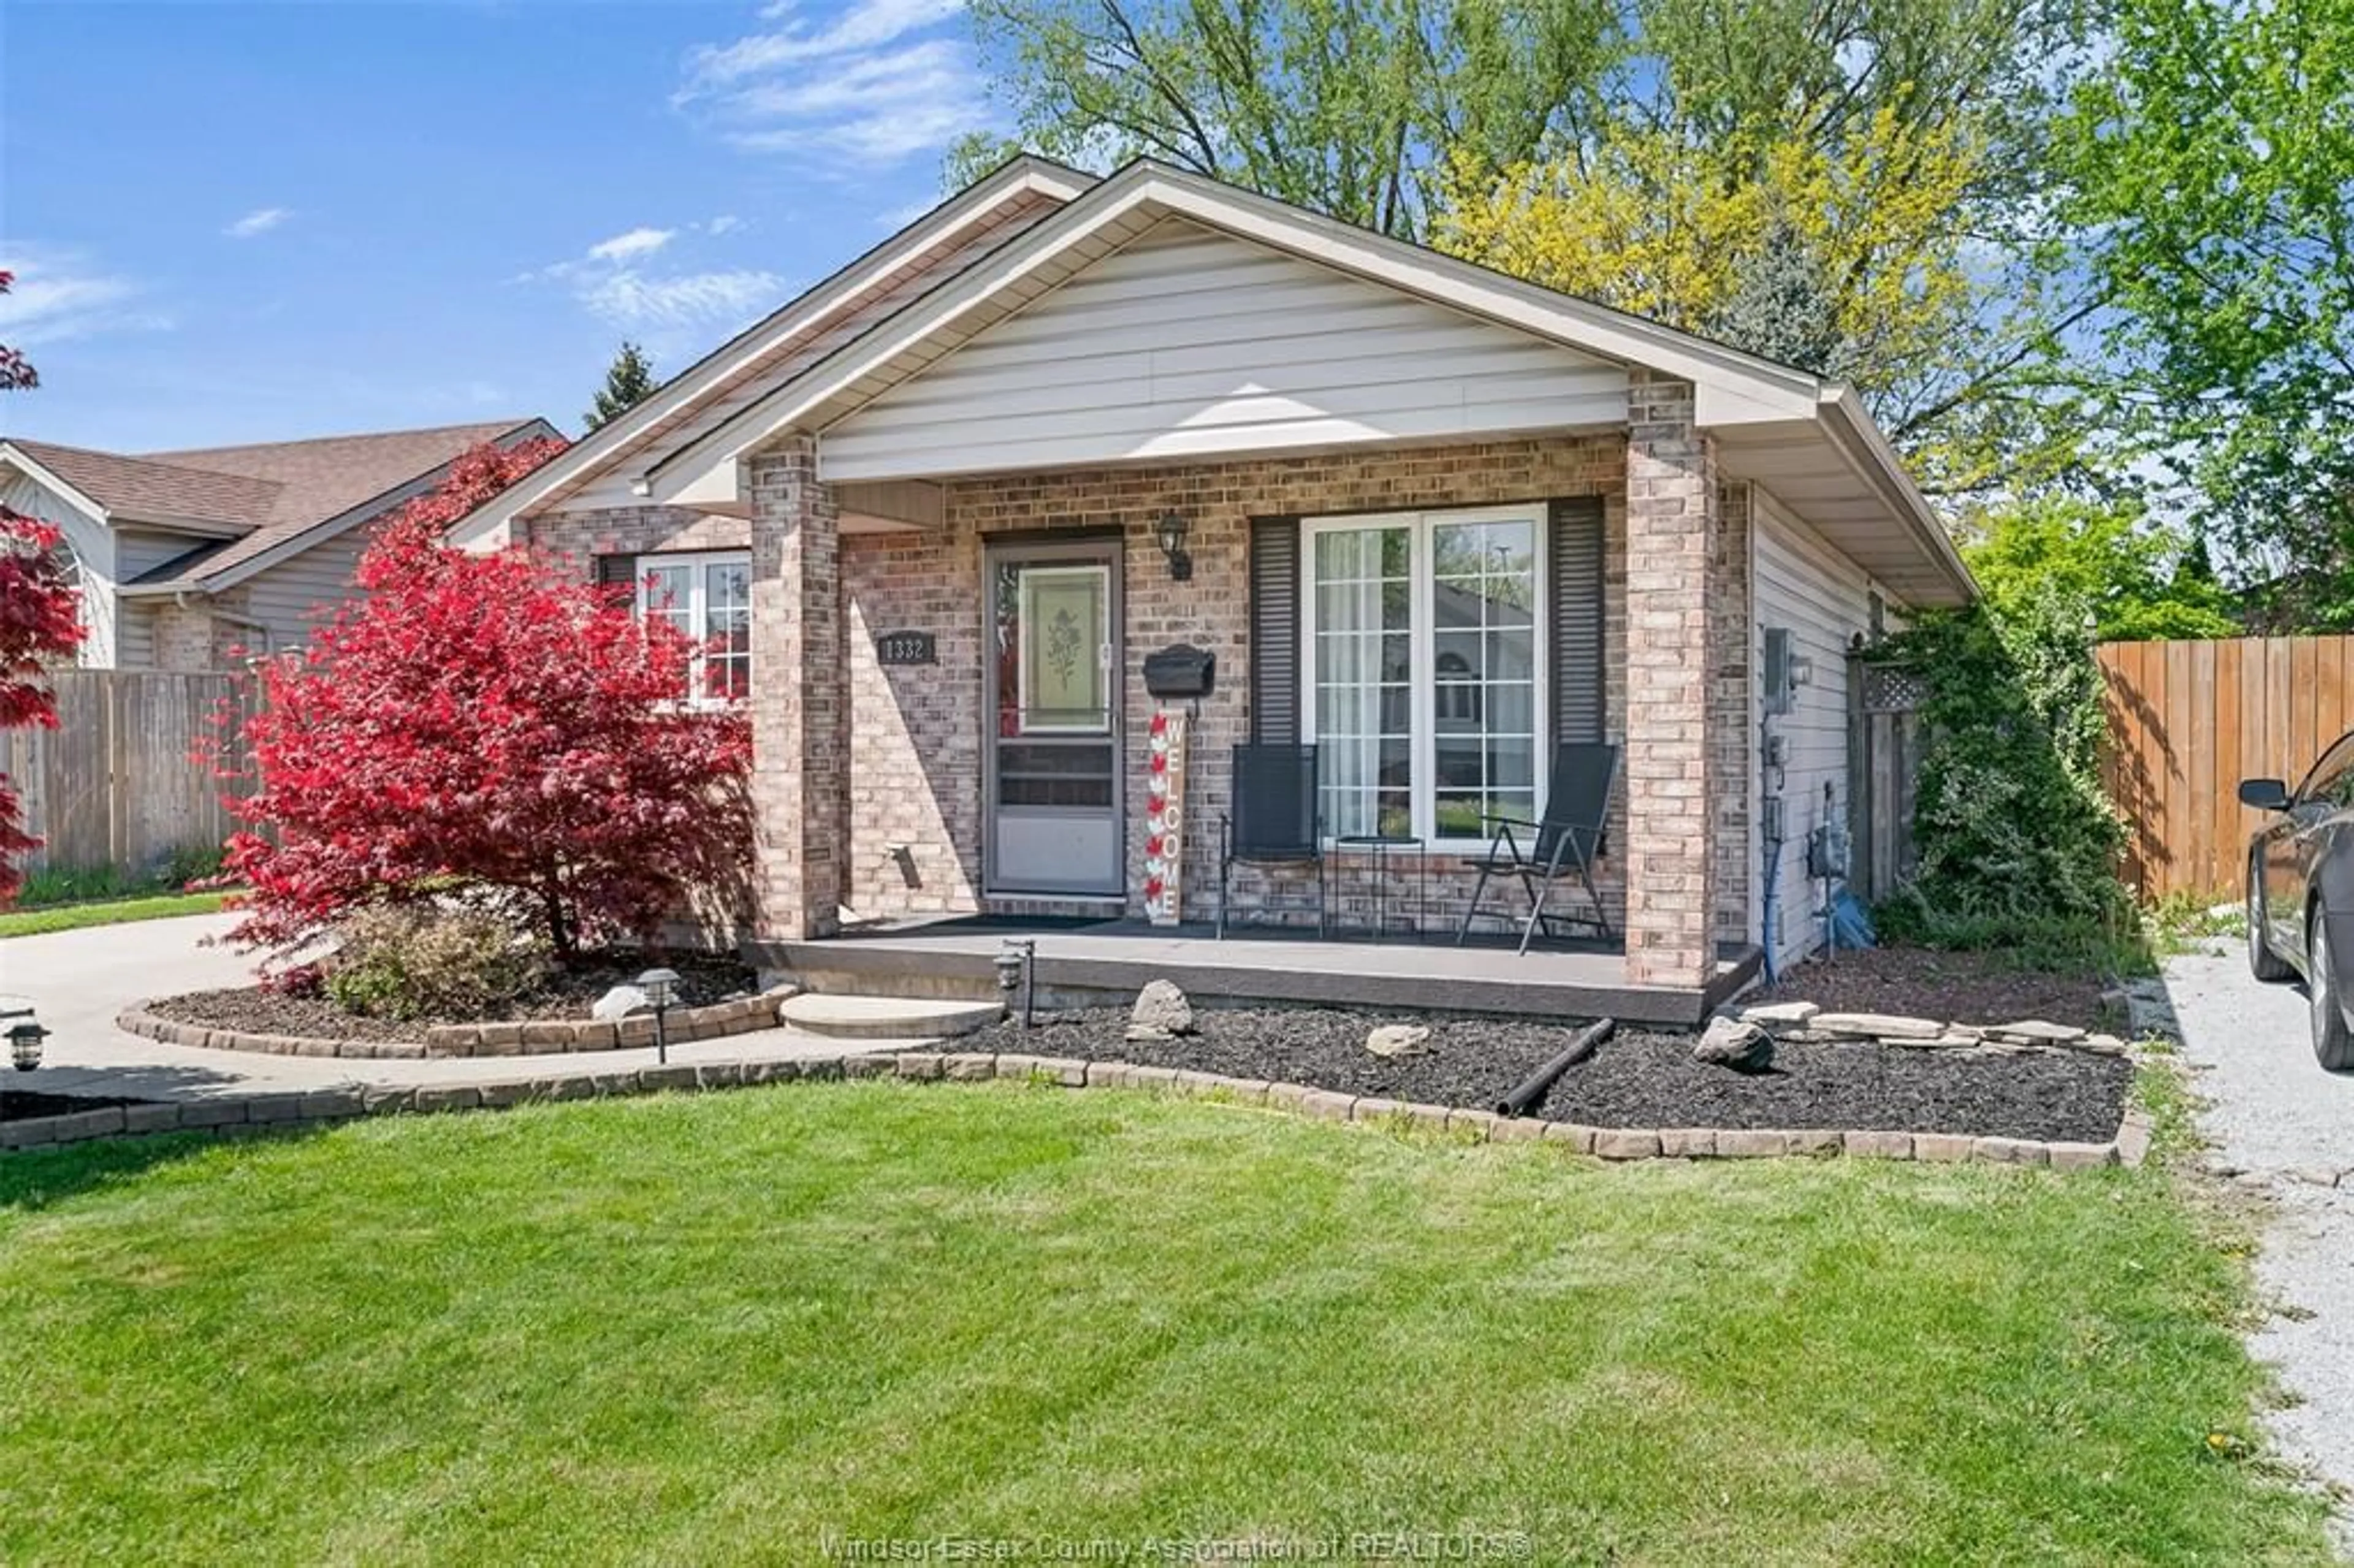 Home with brick exterior material for 1332 HANSEN Cres, Windsor Ontario N8W 5M8